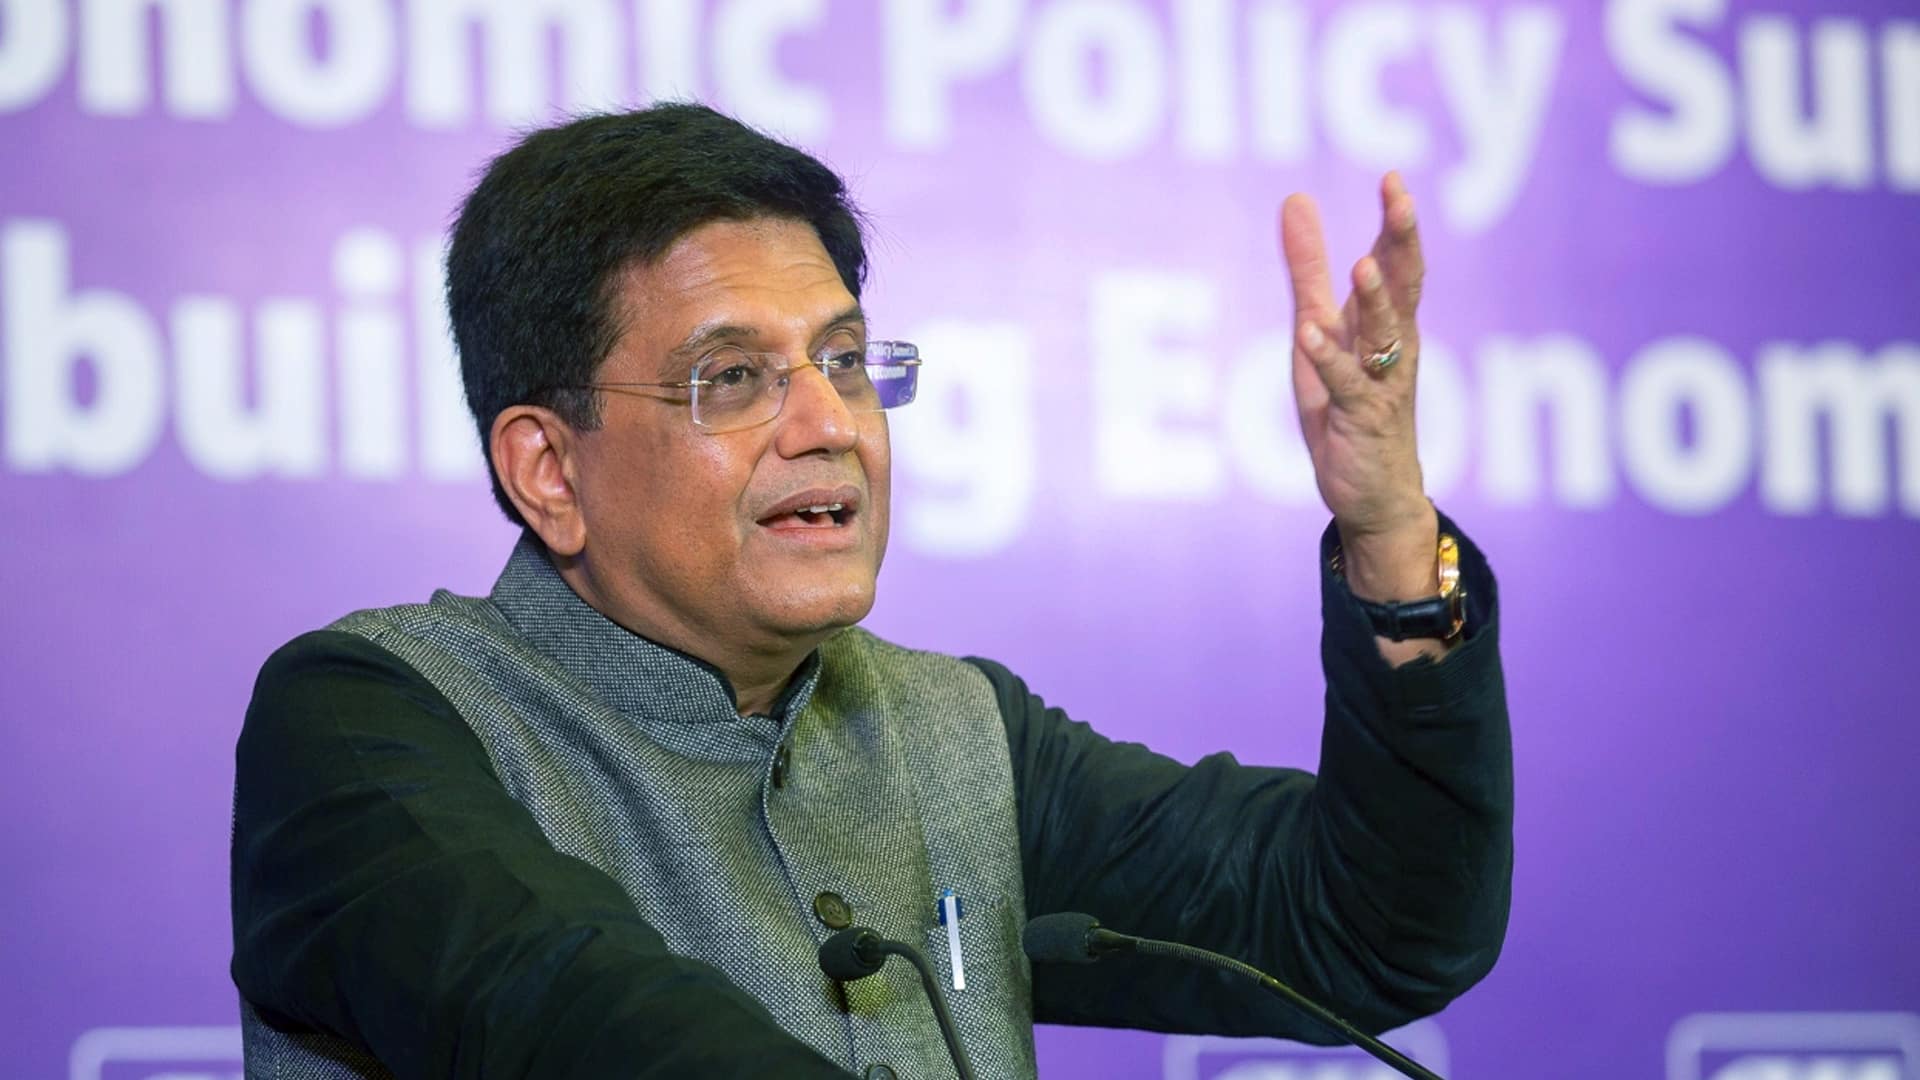 Less govt interference will make startup ecosystem grow, crutches help only in short run: Goyal